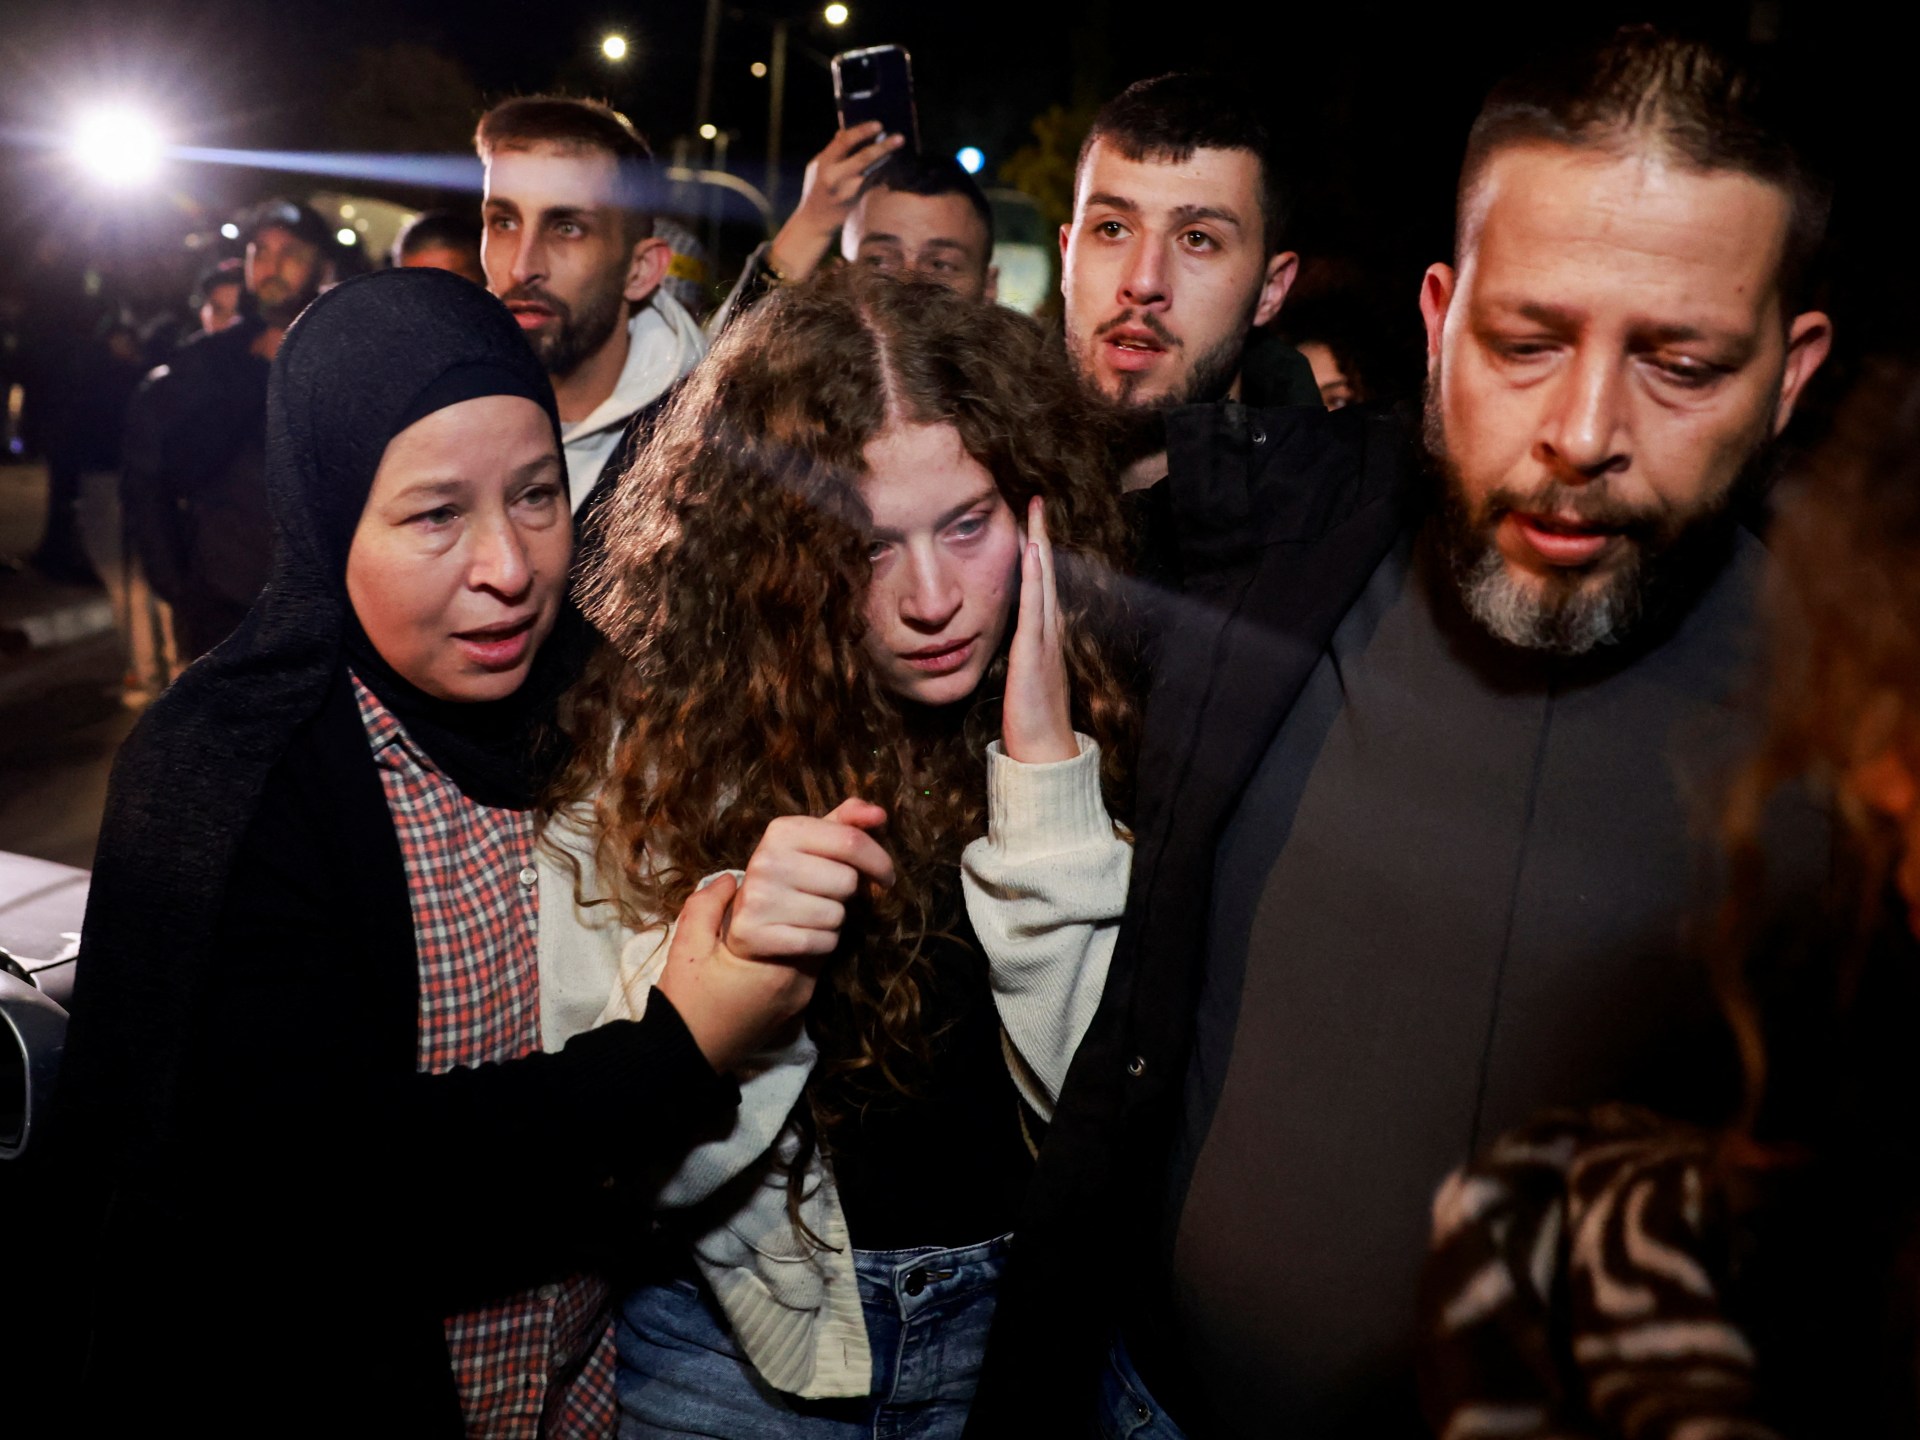 Palestinian activist Ahed Tamimi freed under Israel-Hamas truce | Israel-Palestine conflict